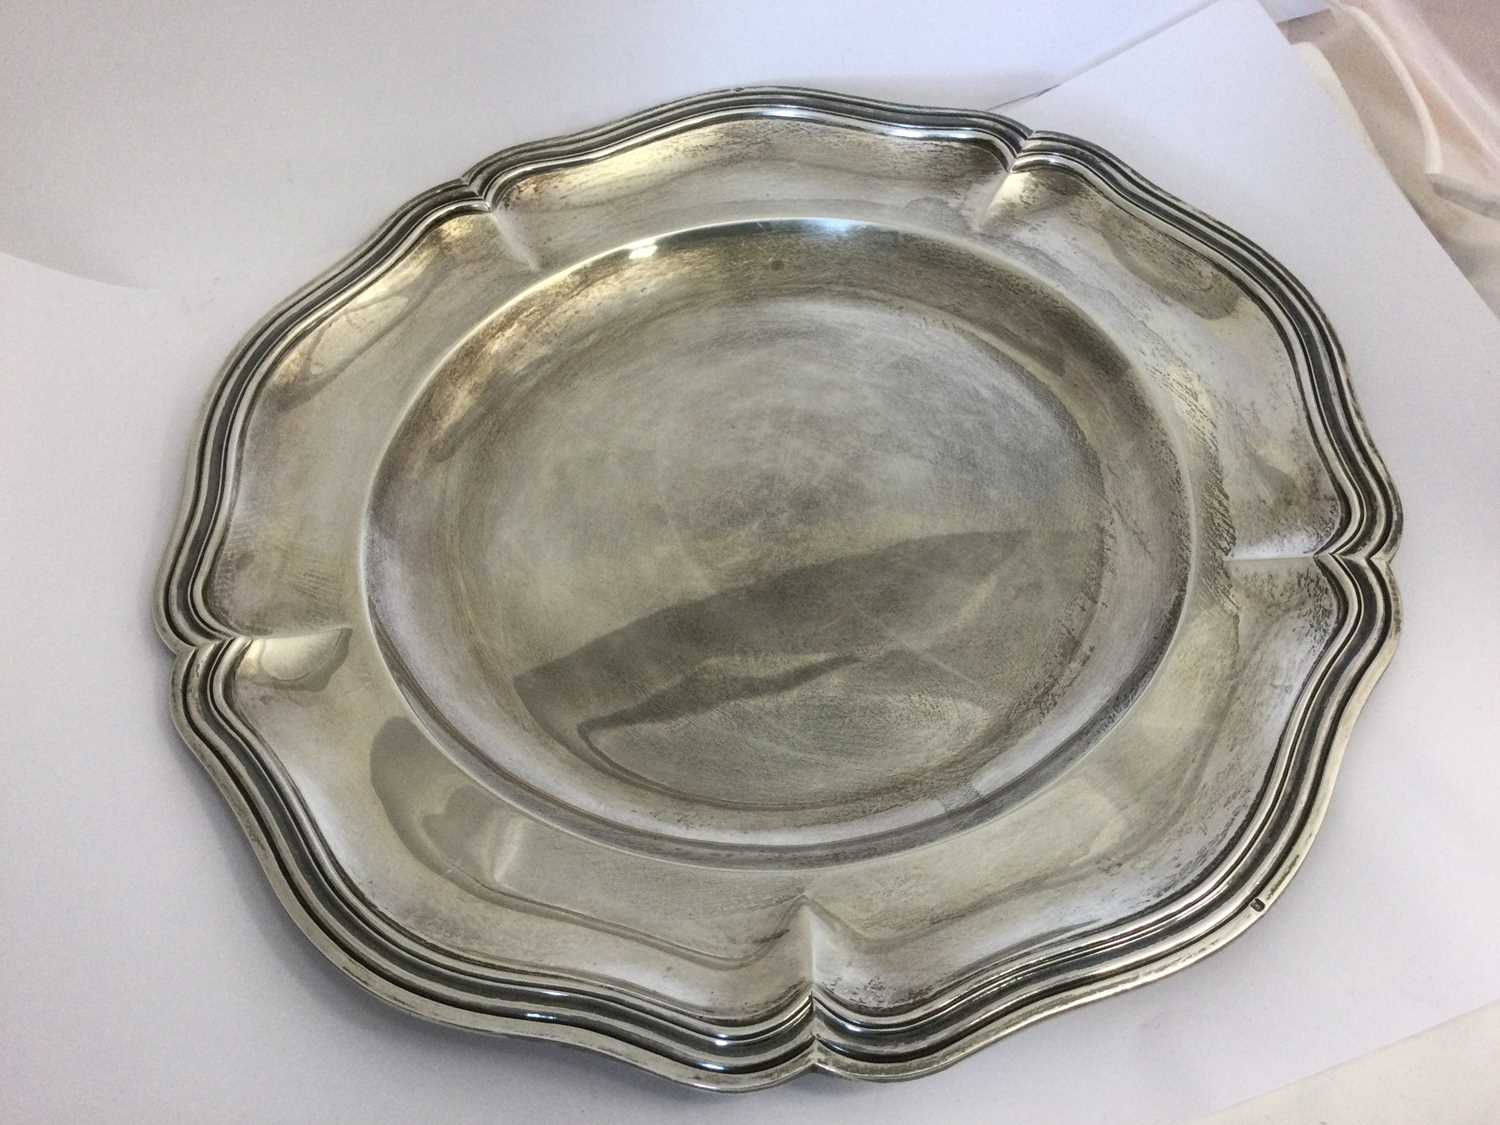 A French Silver Second-Course Dish, Maker's Mark GLJ, Early 20th Century - Image 4 of 8